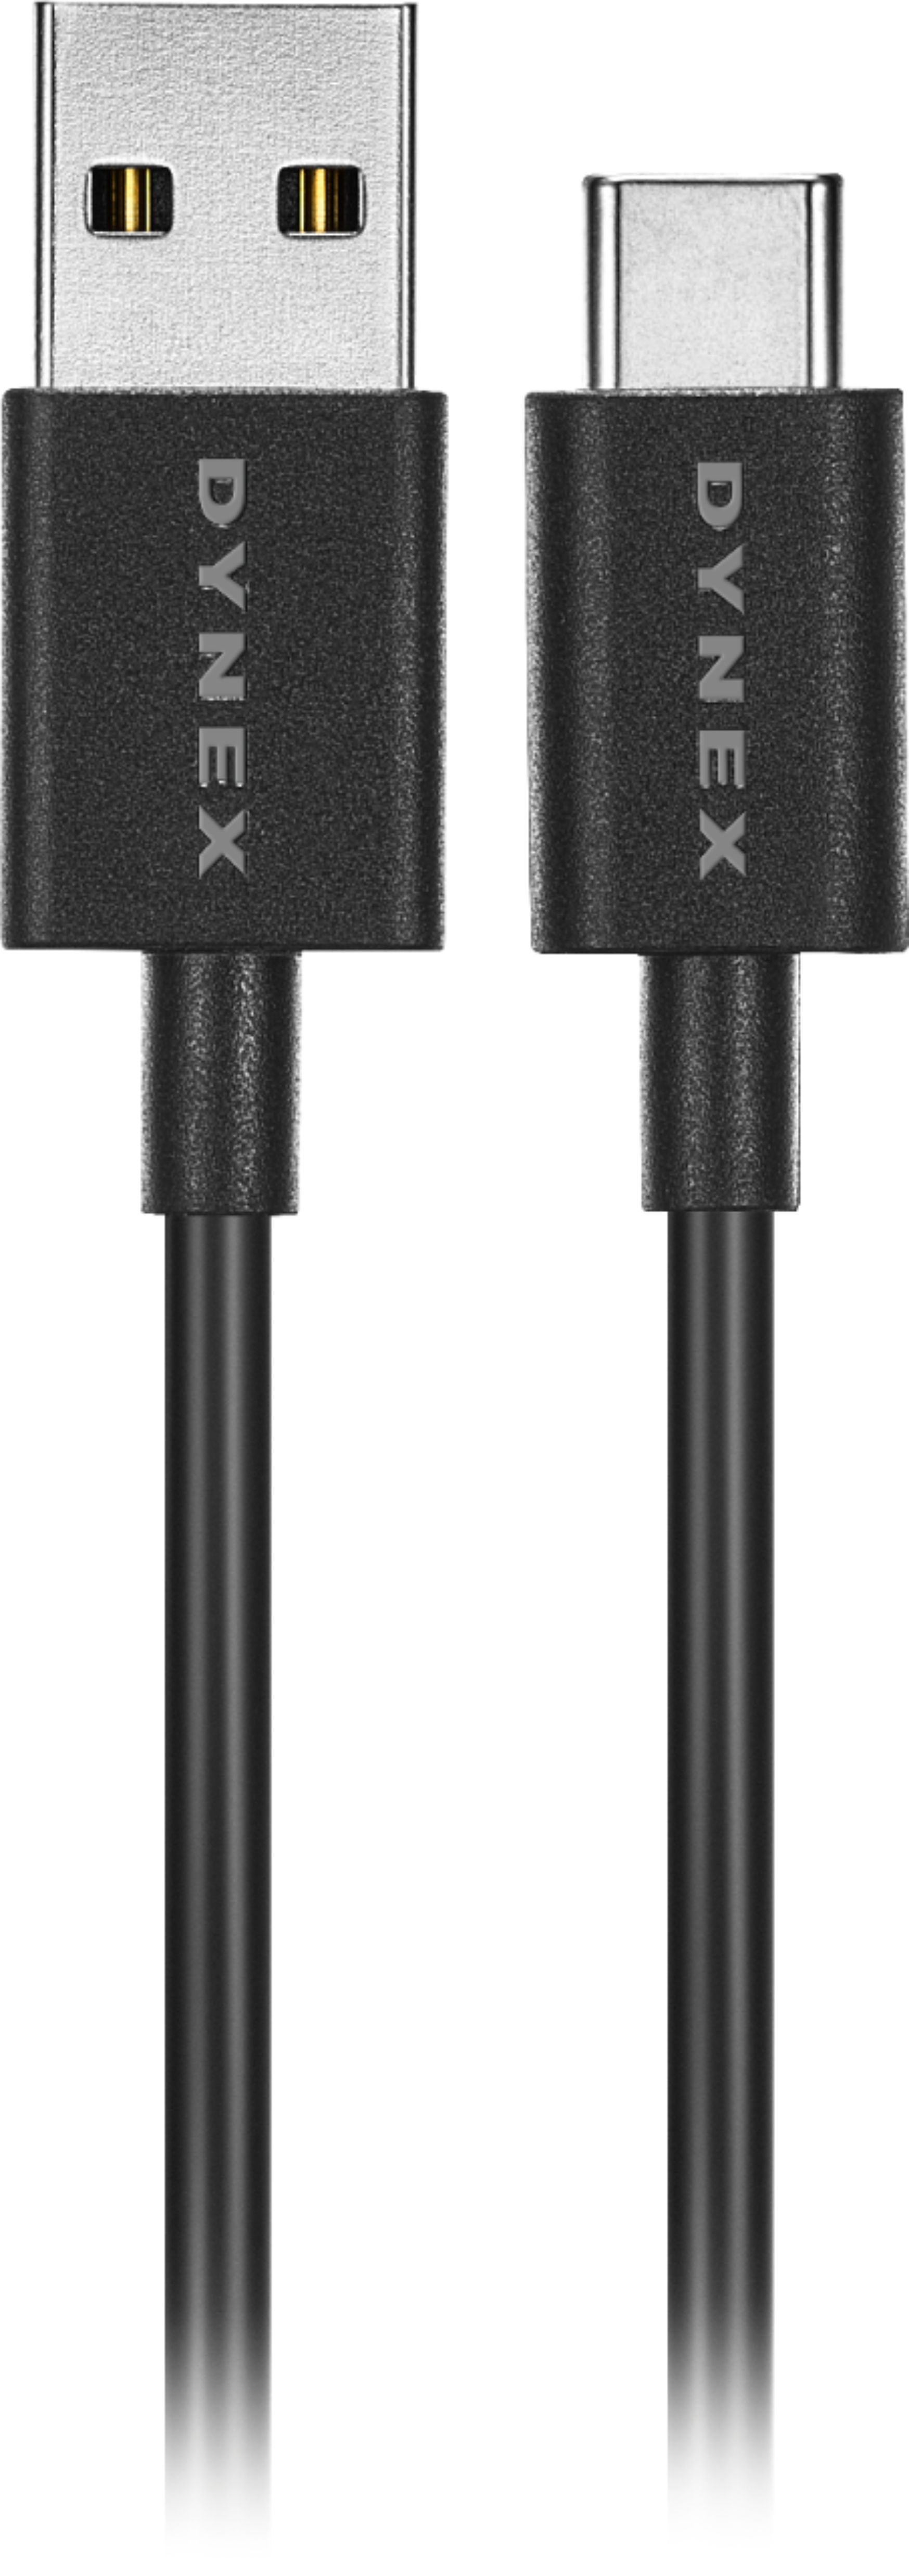 Voorkeursbehandeling plaats Antipoison Dynex™ 3' USB Type C-to-USB Type A Charge-and-Sync Cable (2-Pack) Black  DX-VCA322K2 - Best Buy